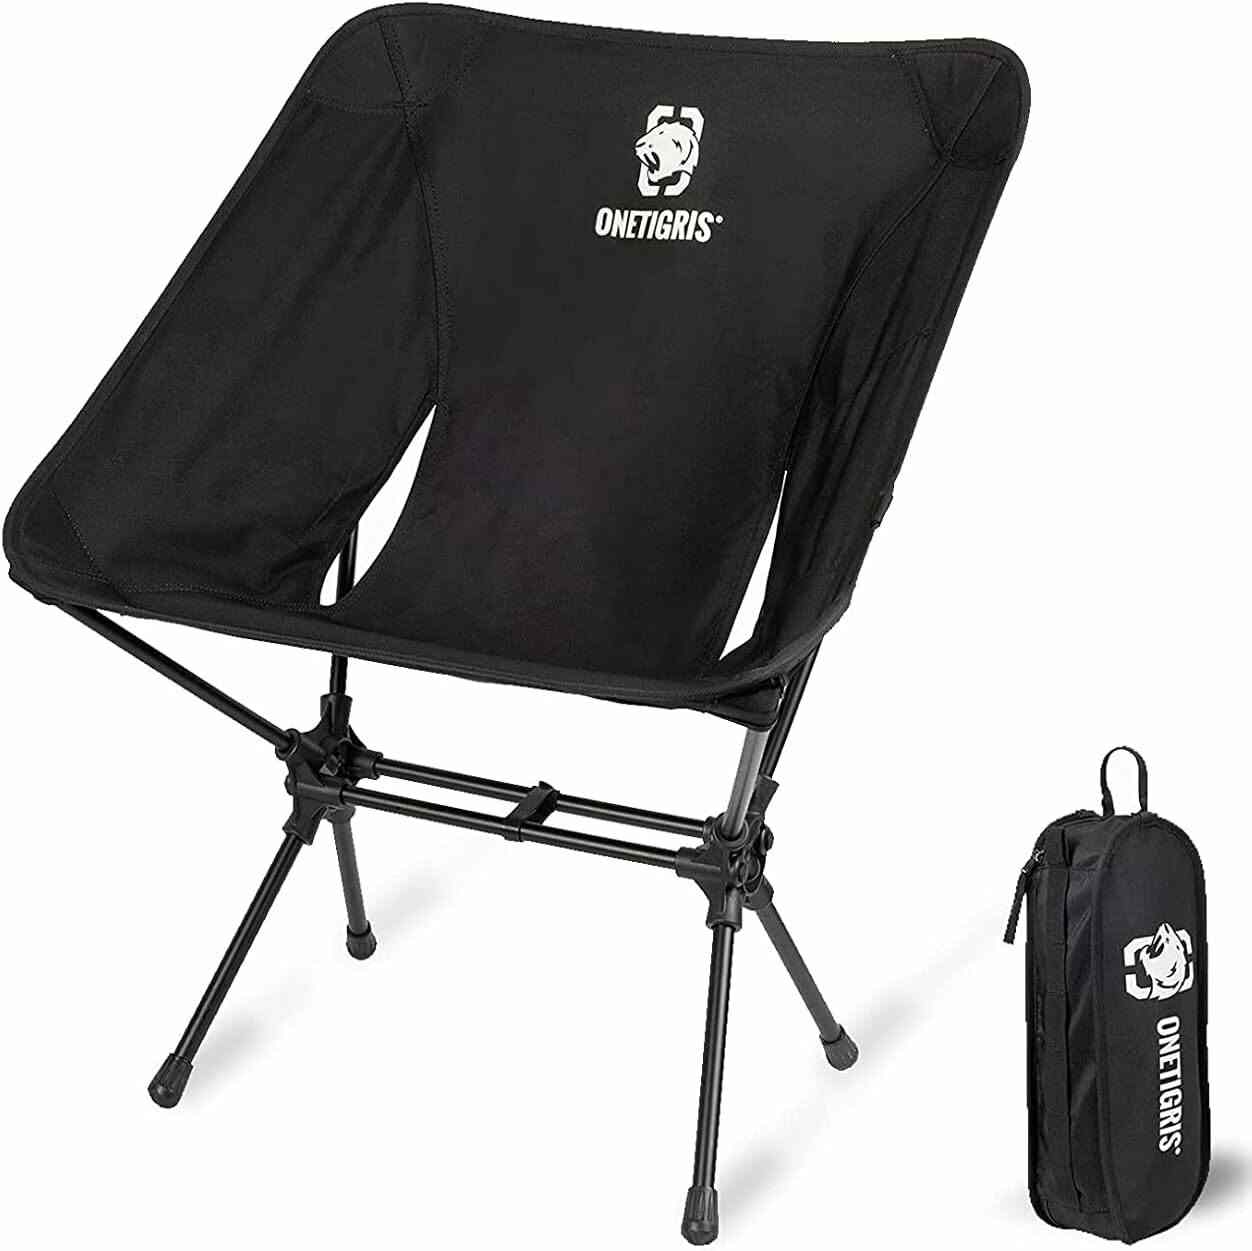 One Tigris Backpacking Chair